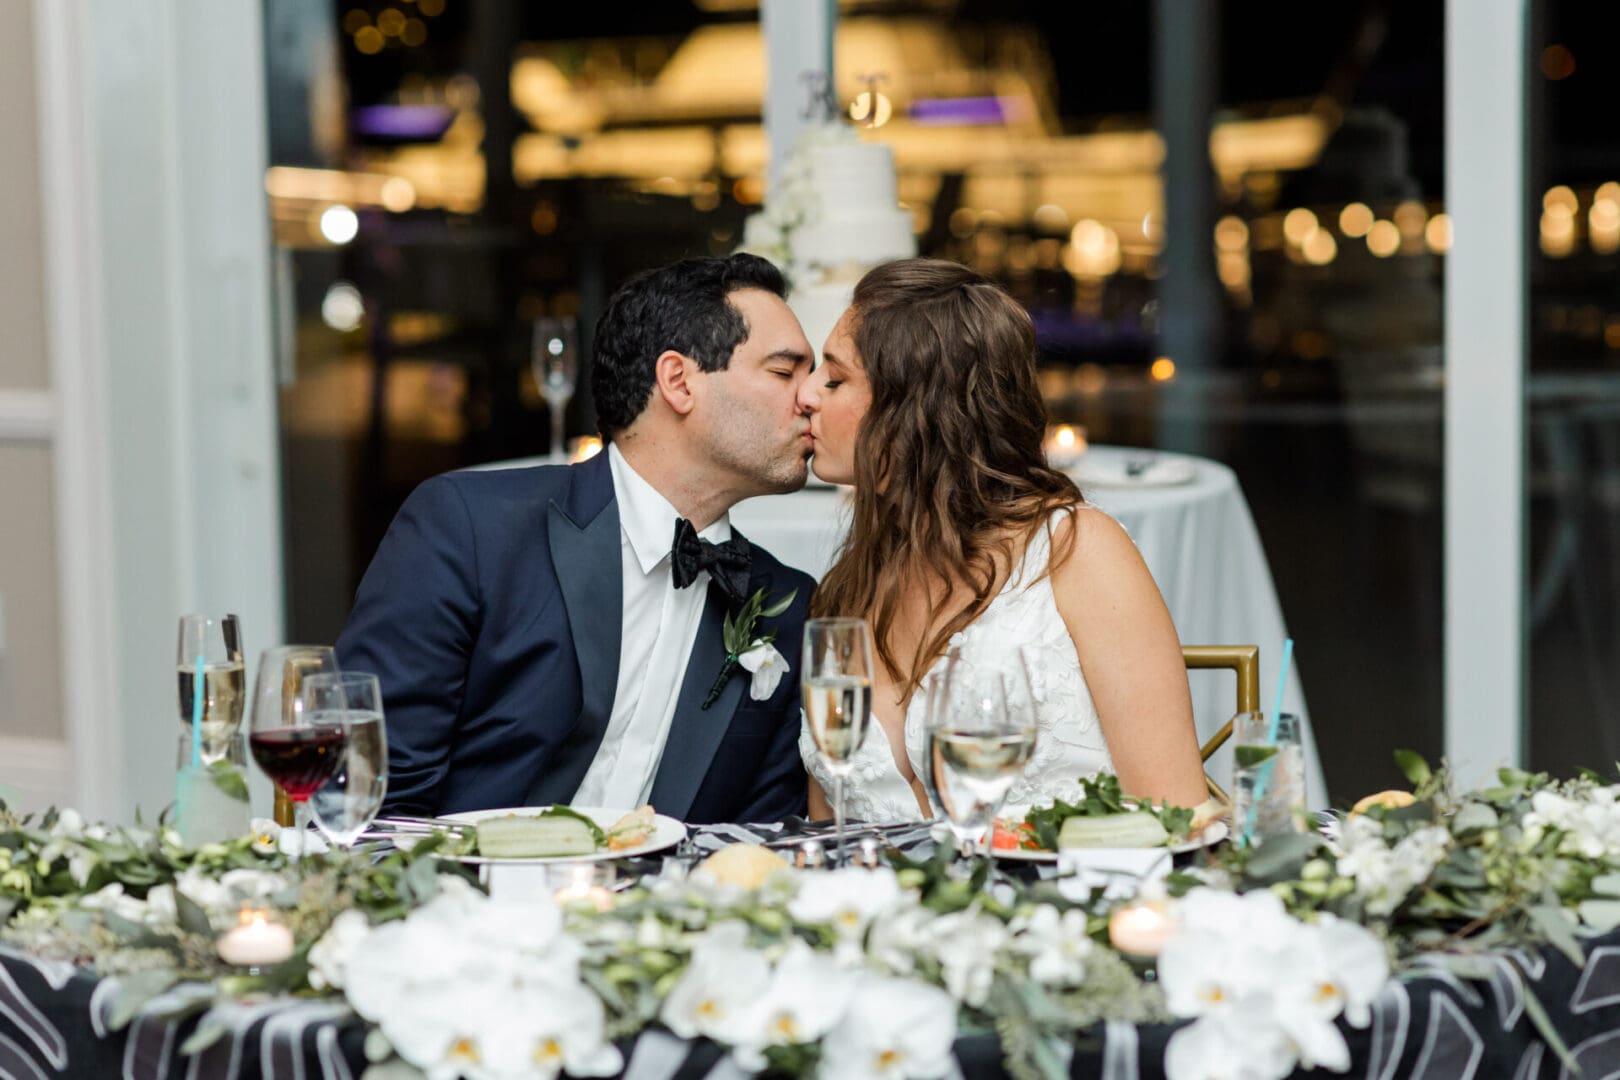 A bride and groom kissing at a wedding reception table, decorated with white flowers and candles, with a cake in the background.